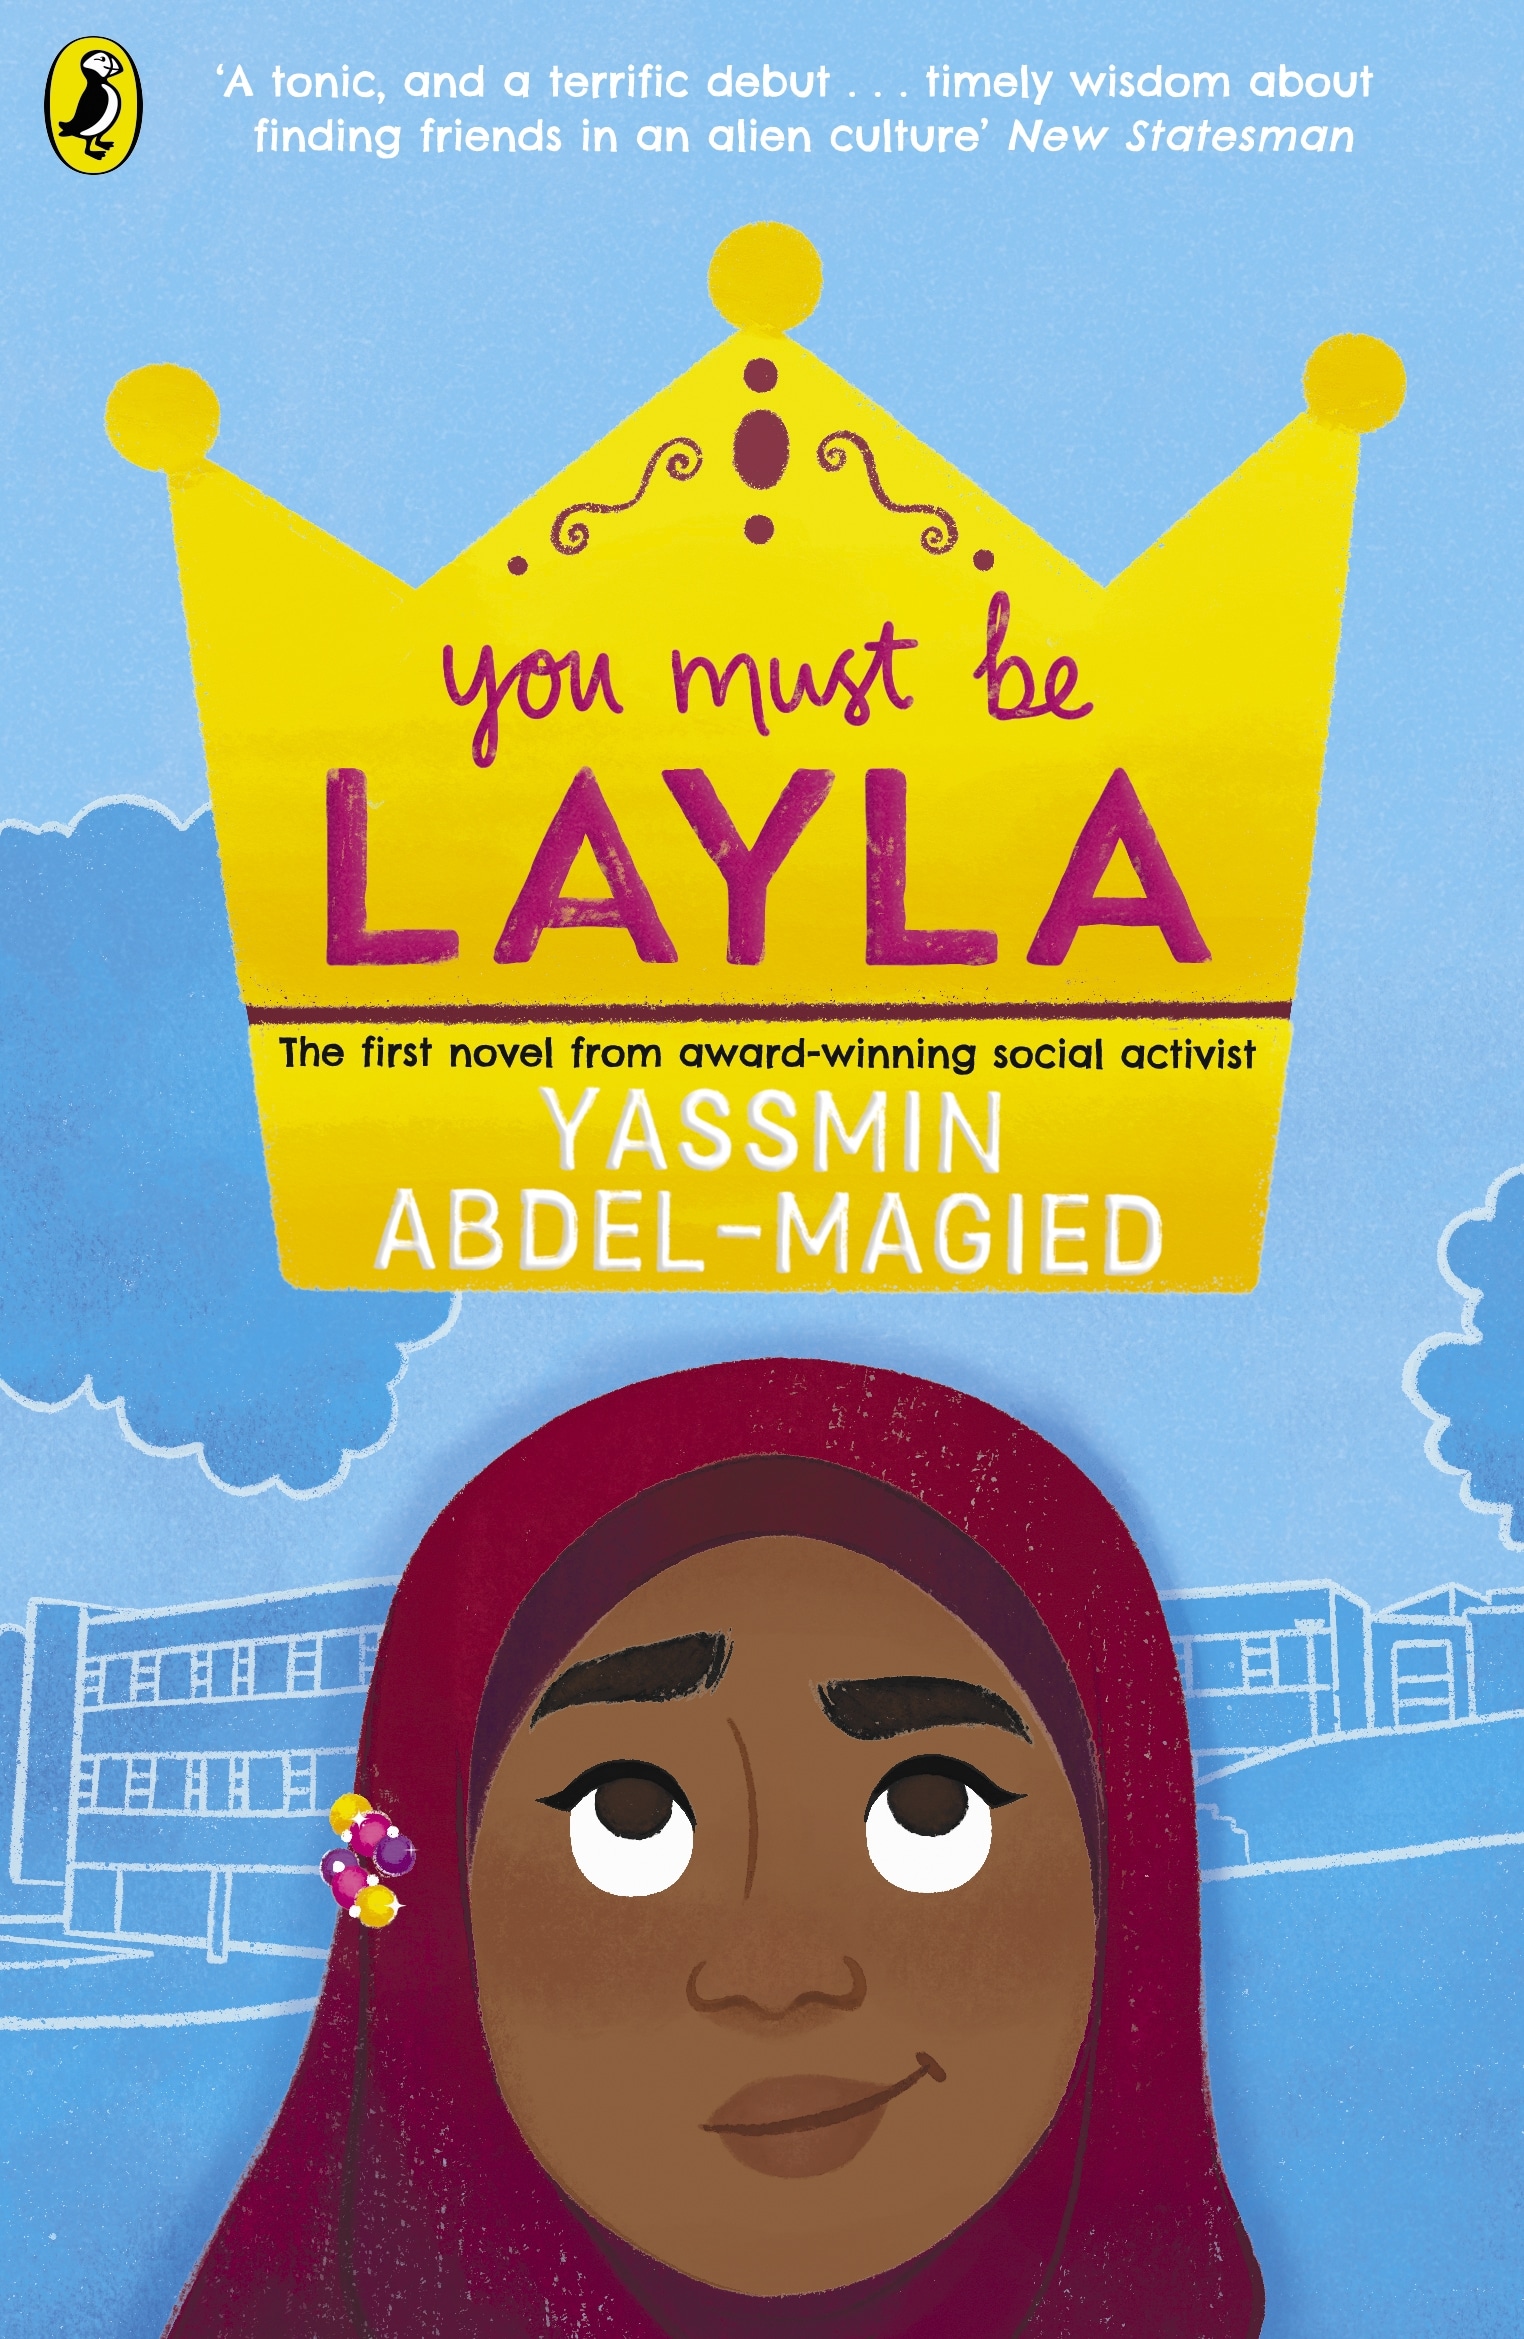 Book “You Must Be Layla” by Yassmin Abdel-Magied — February 6, 2020